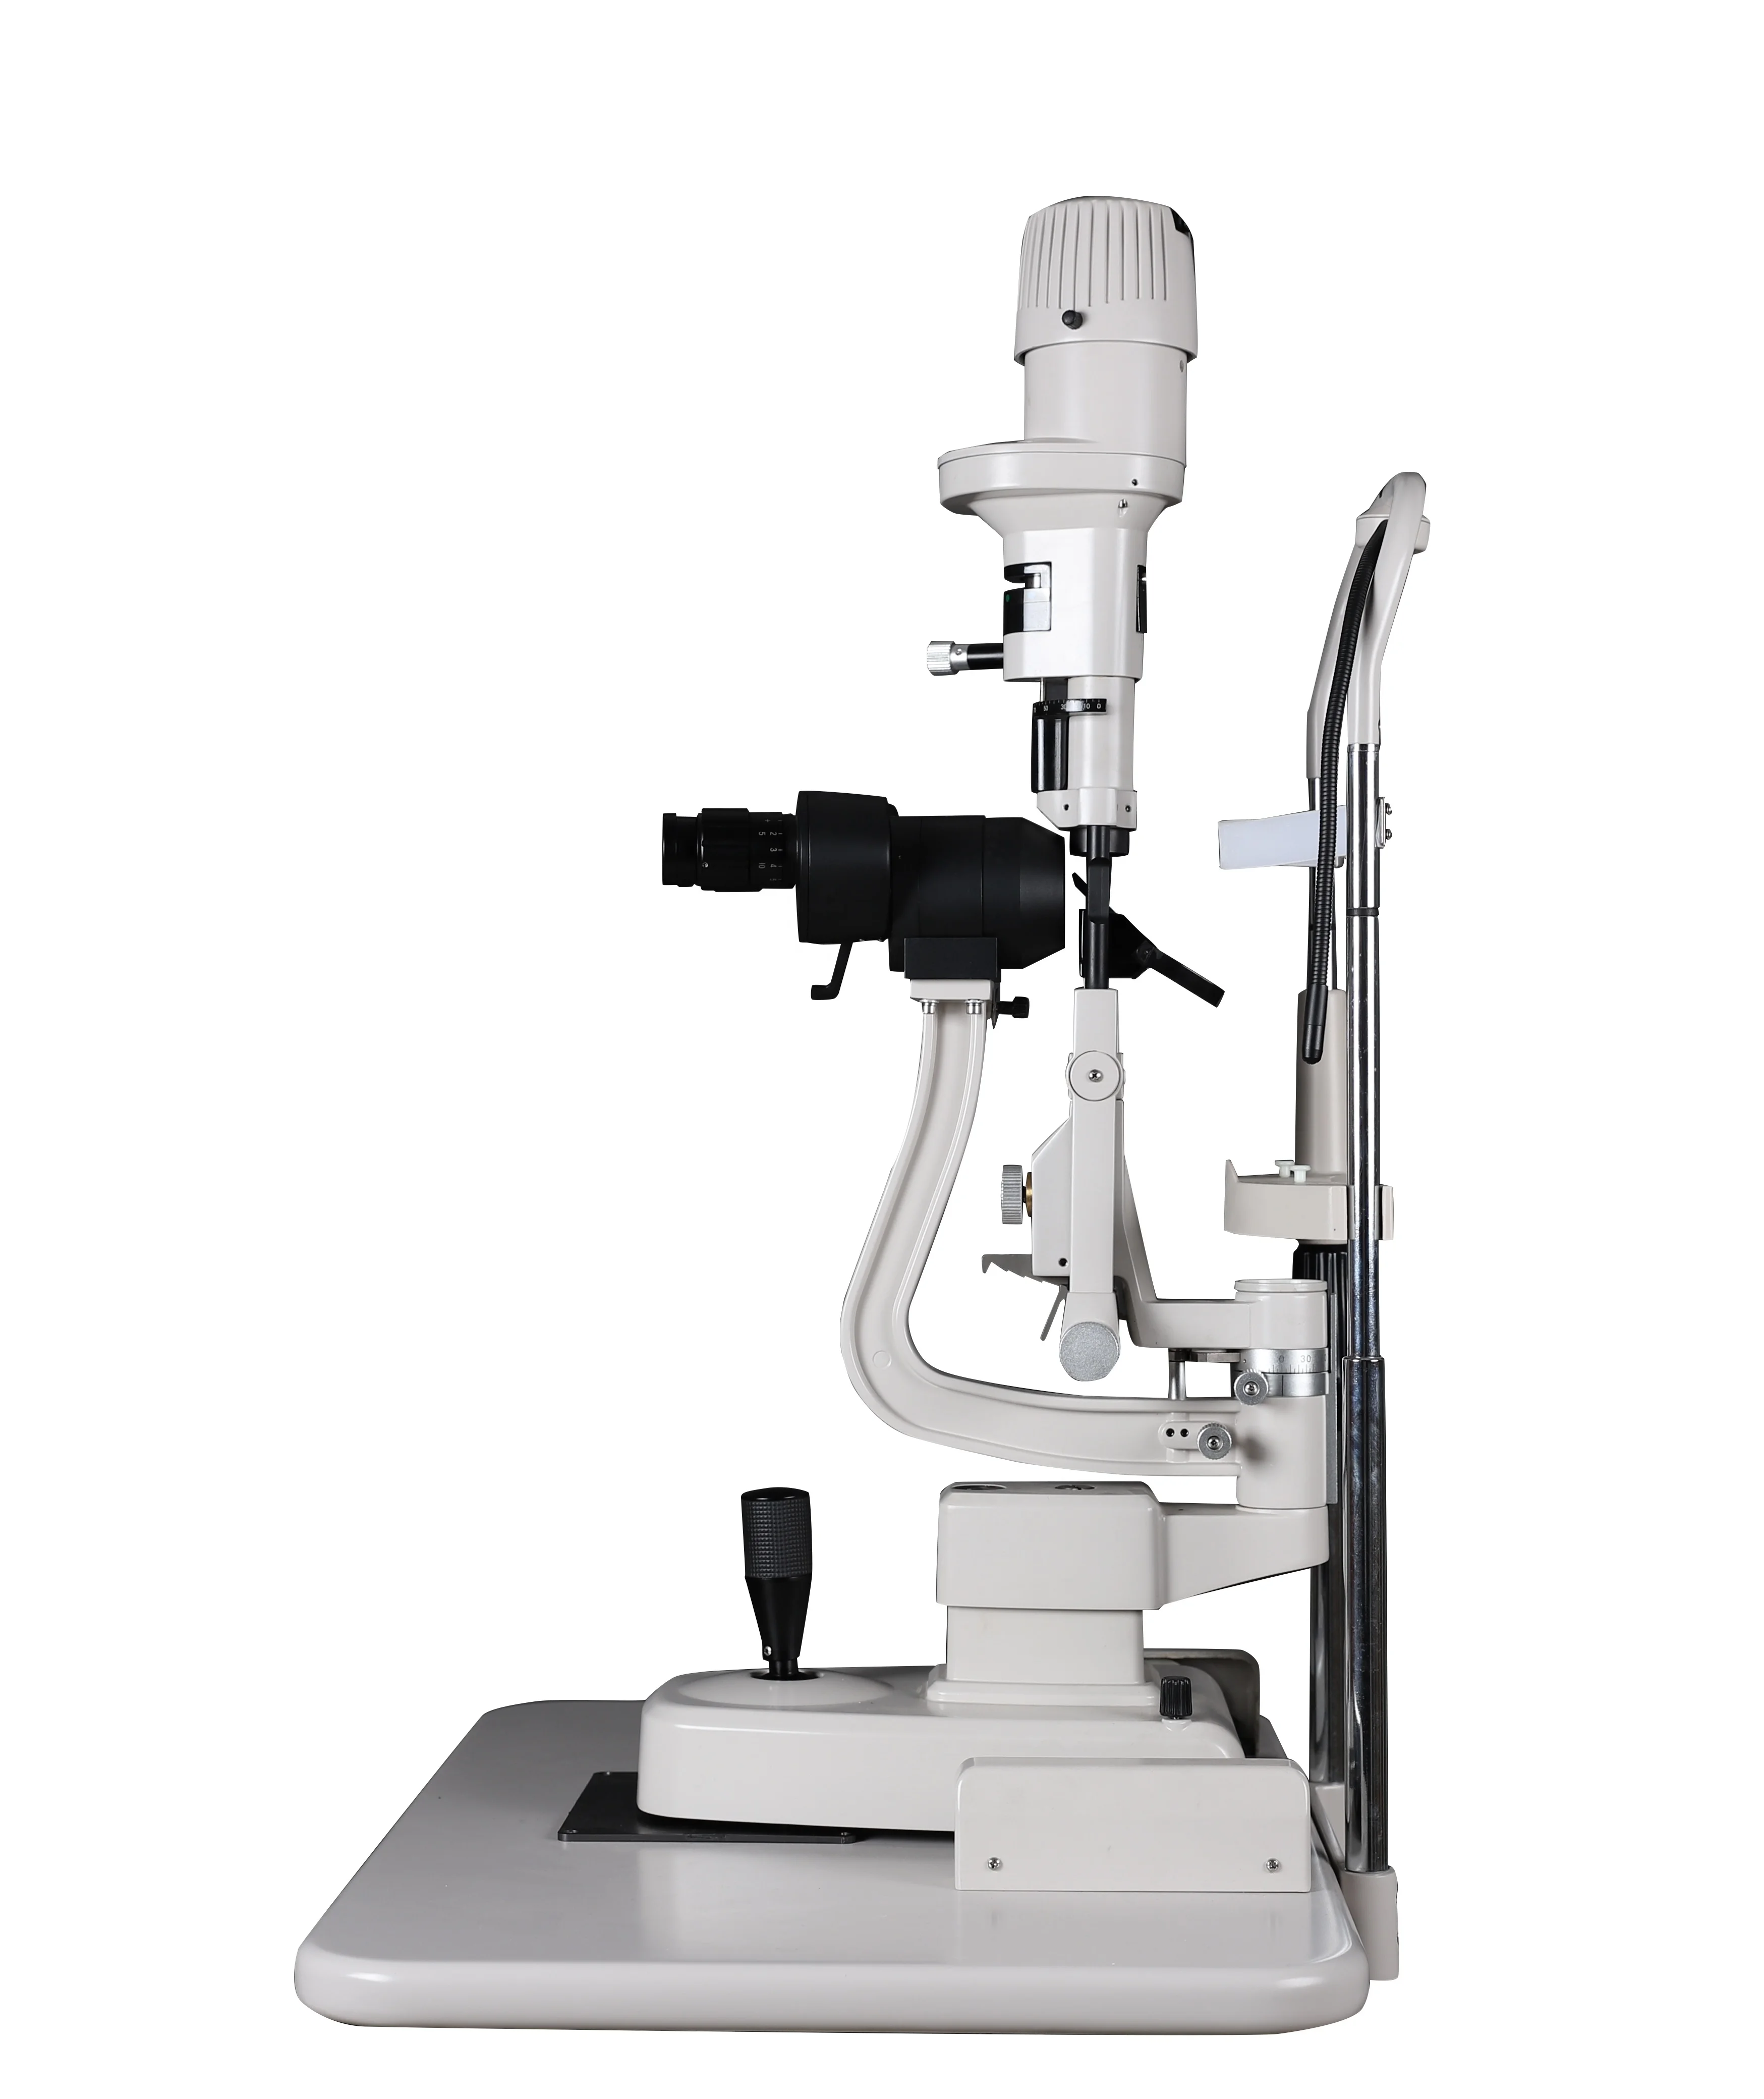 
Factory Direct 2 Steps With Adopter Slit Lamp For Optometry 